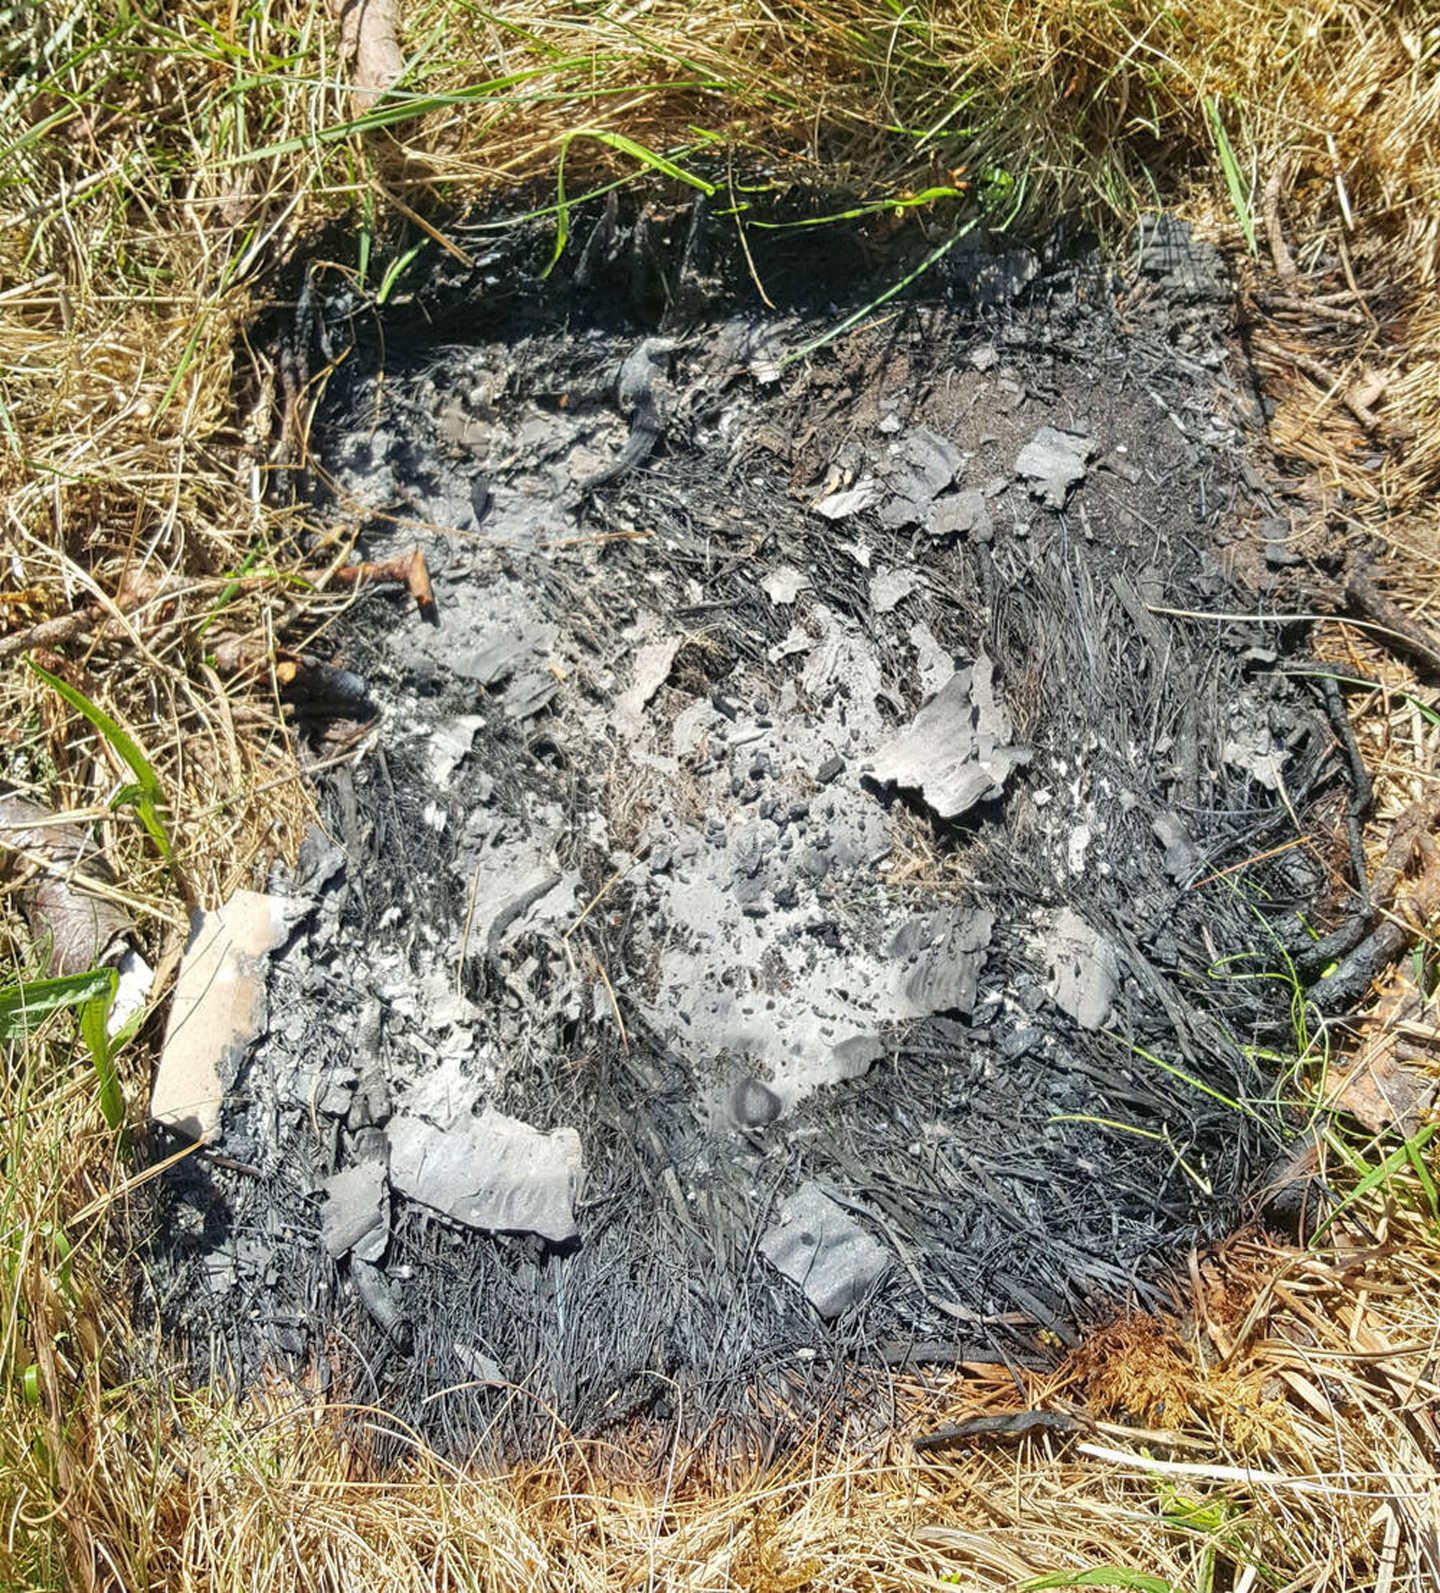 A burned patch of grass caused by a disposable barbecue.